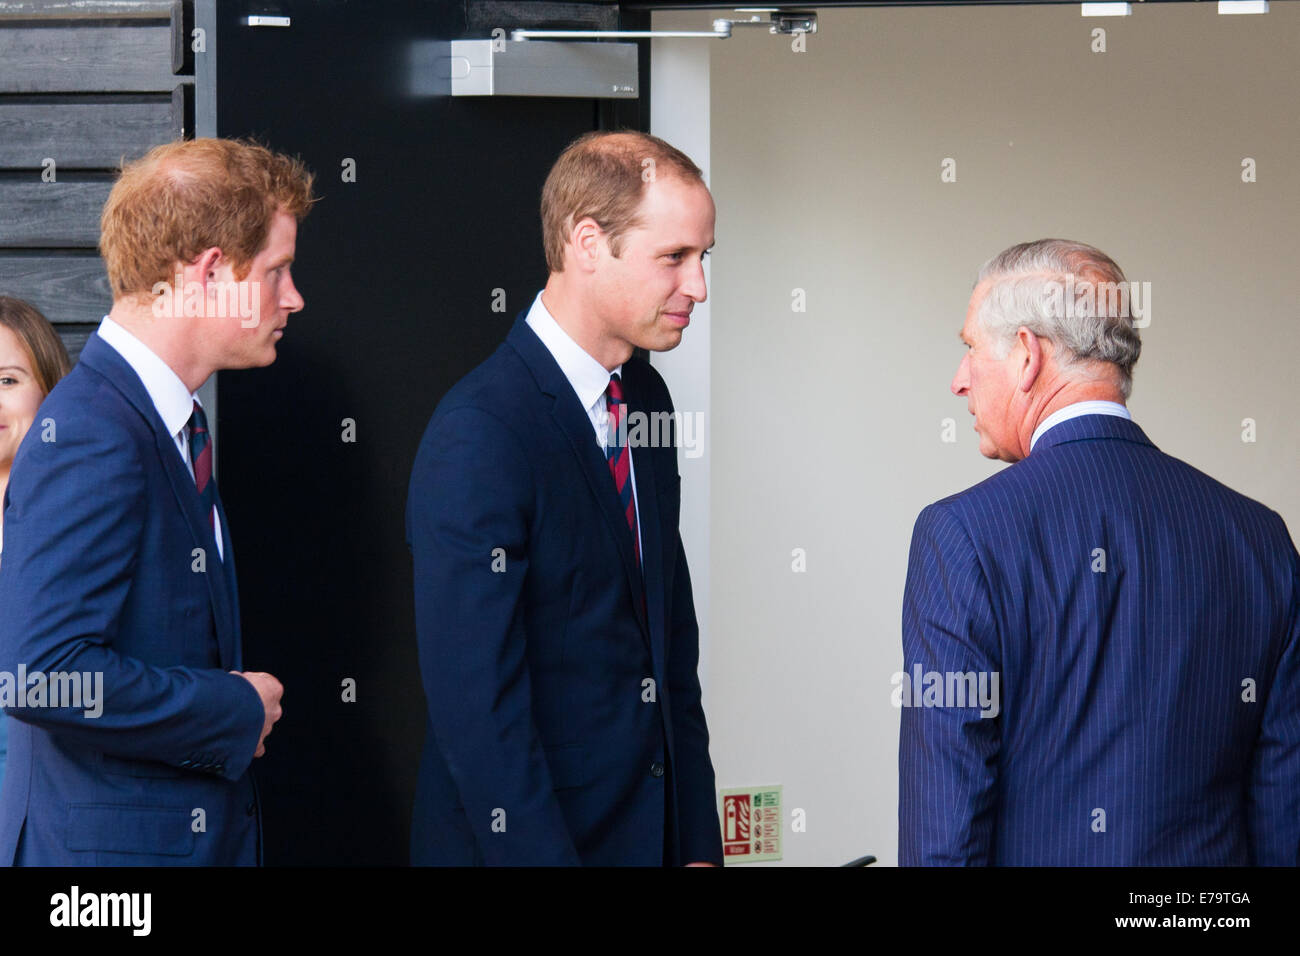 Queen Elizabeth Olympic Park, London, UK. 10th Sep, 2014. Princes Harry and William greet their father Prince Charles as he arrives at the opening ceremony  of the Invictus Games, where over 400 competitors from 13 nations will take part in an international sporting event for wounded, injured and sick Servicemen and women. Credit:  Paul Davey/Alamy Live News Stock Photo